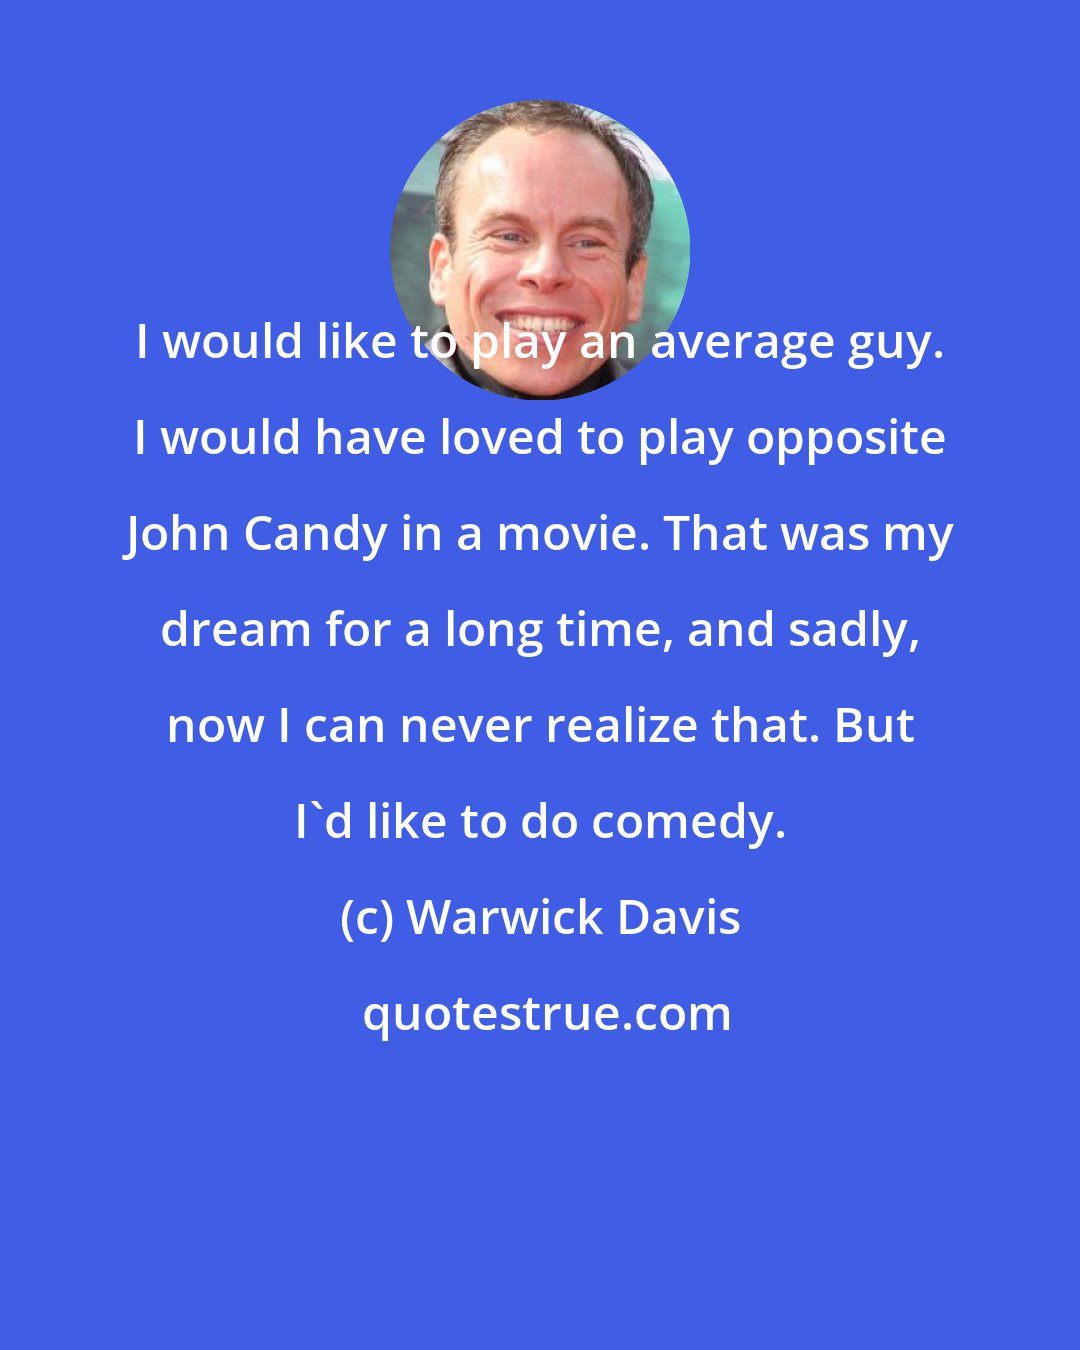 Warwick Davis: I would like to play an average guy. I would have loved to play opposite John Candy in a movie. That was my dream for a long time, and sadly, now I can never realize that. But I'd like to do comedy.